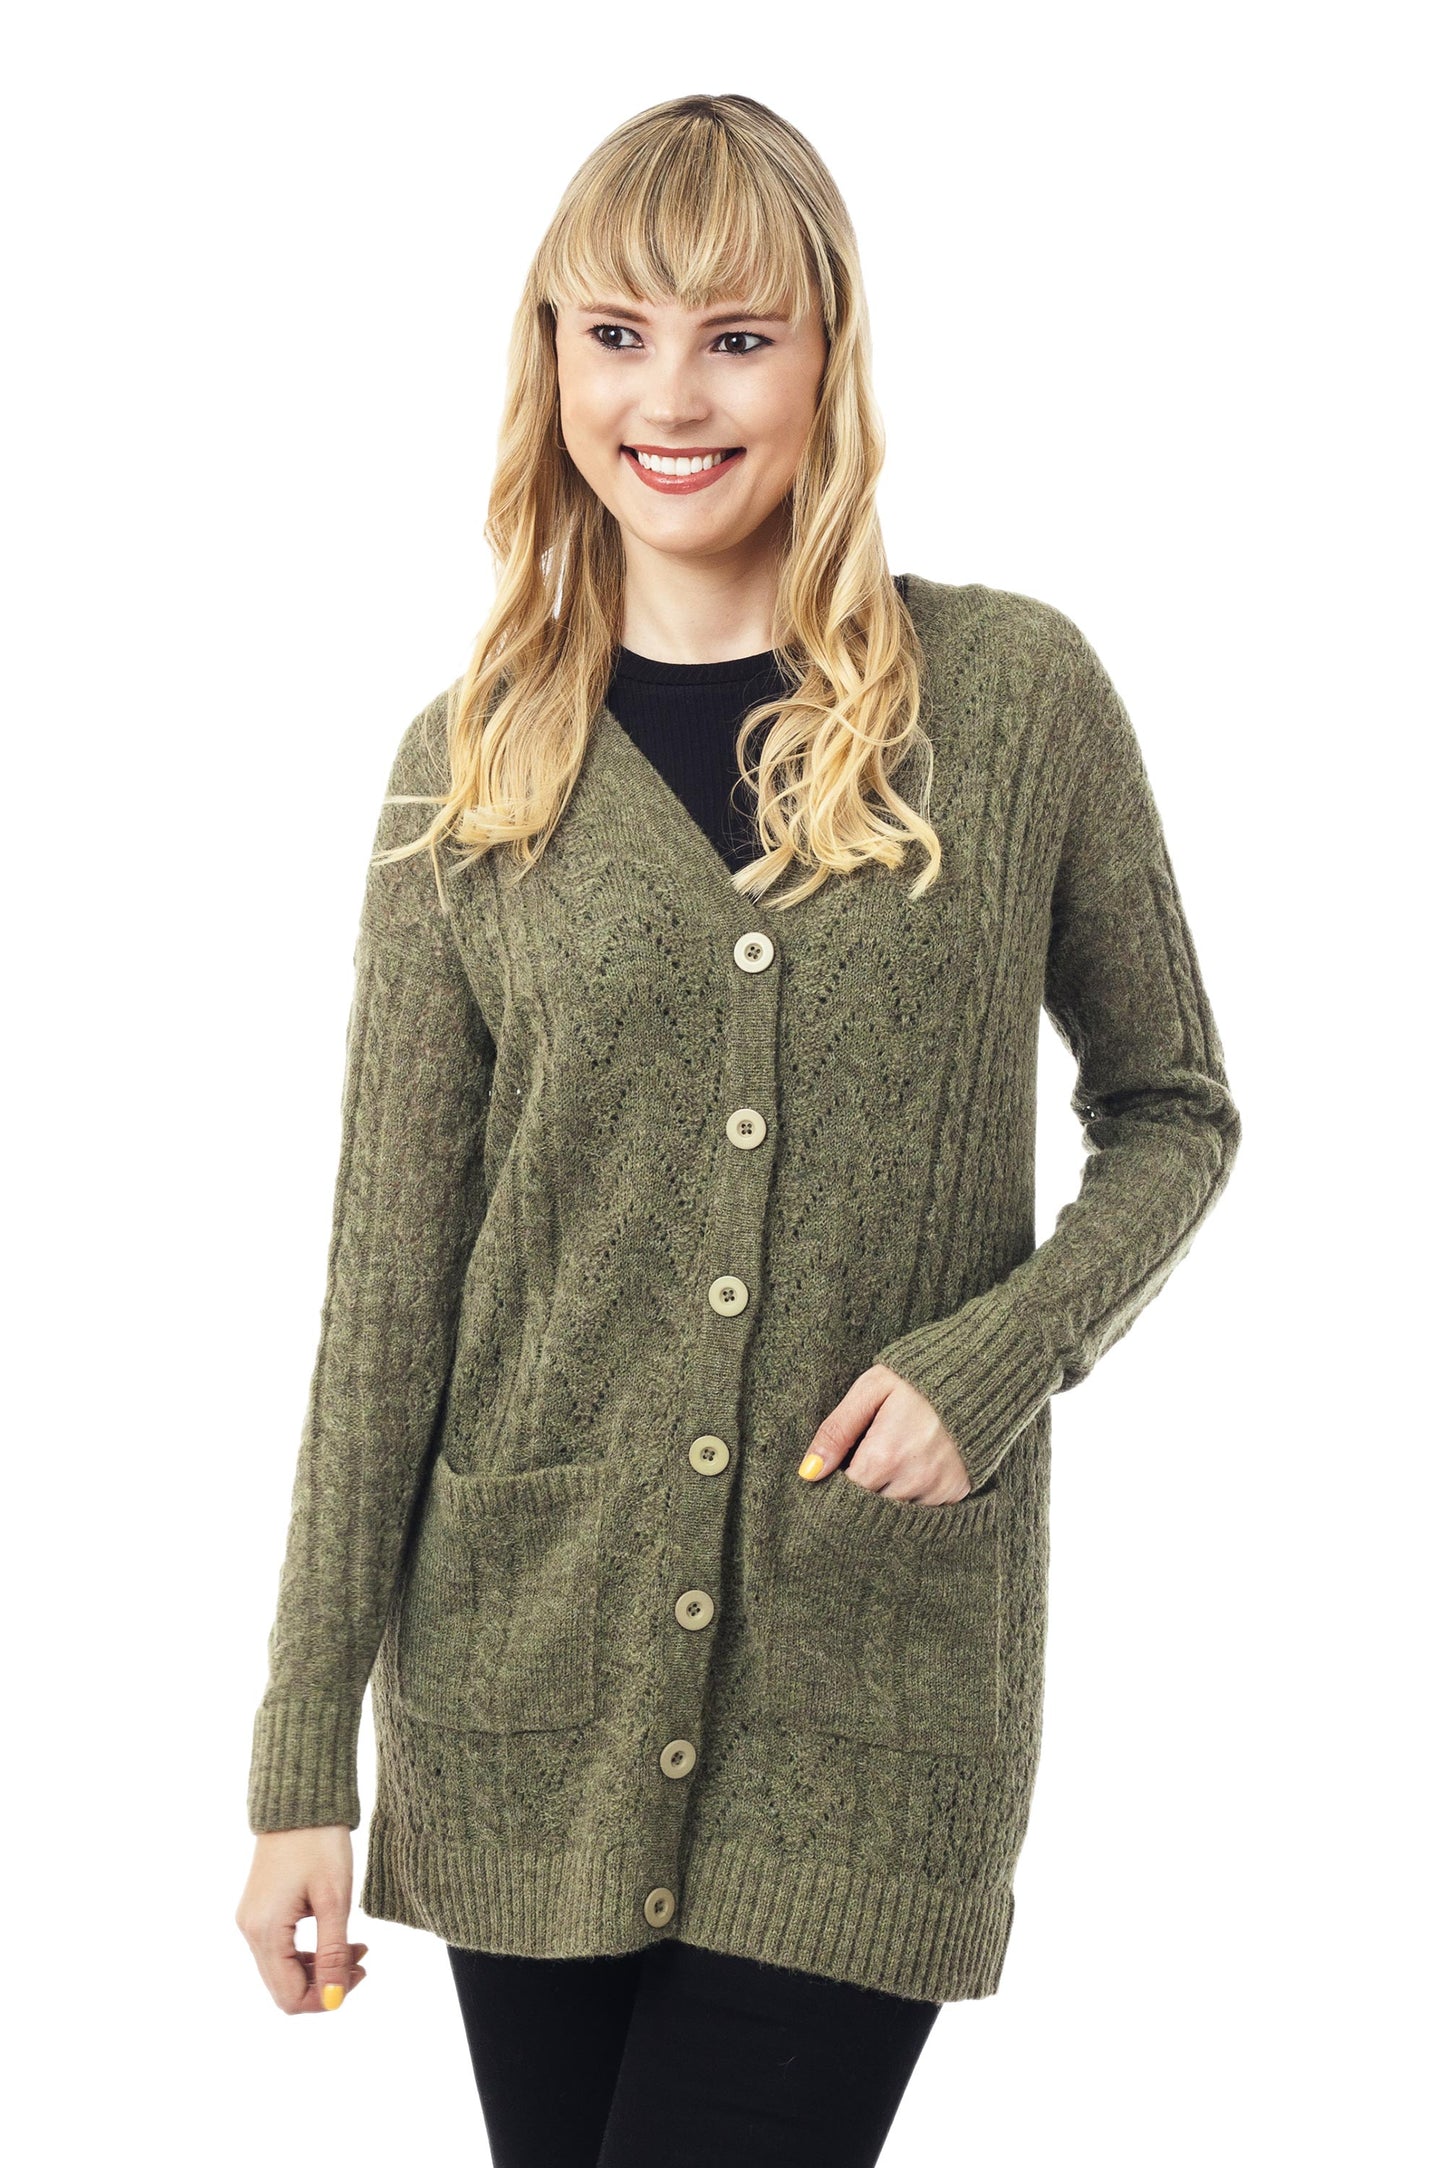 Comfortable Charm in Olive Cable Knit Baby Apaca Blend Cardigan in Olive from Peru